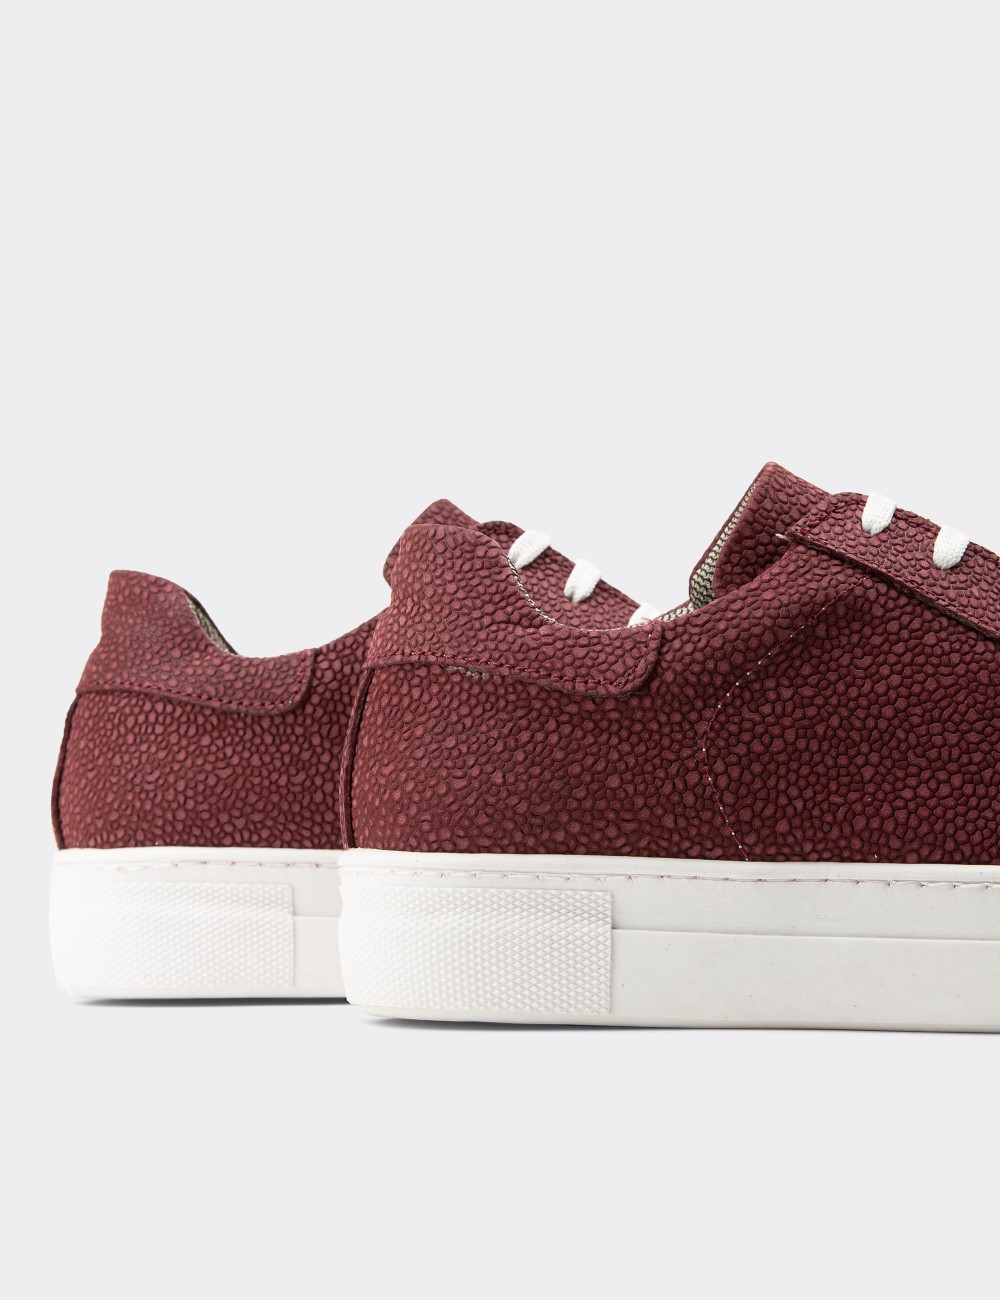 Burgundy Suede Leather Sneakers - Z1681ZBRDC14